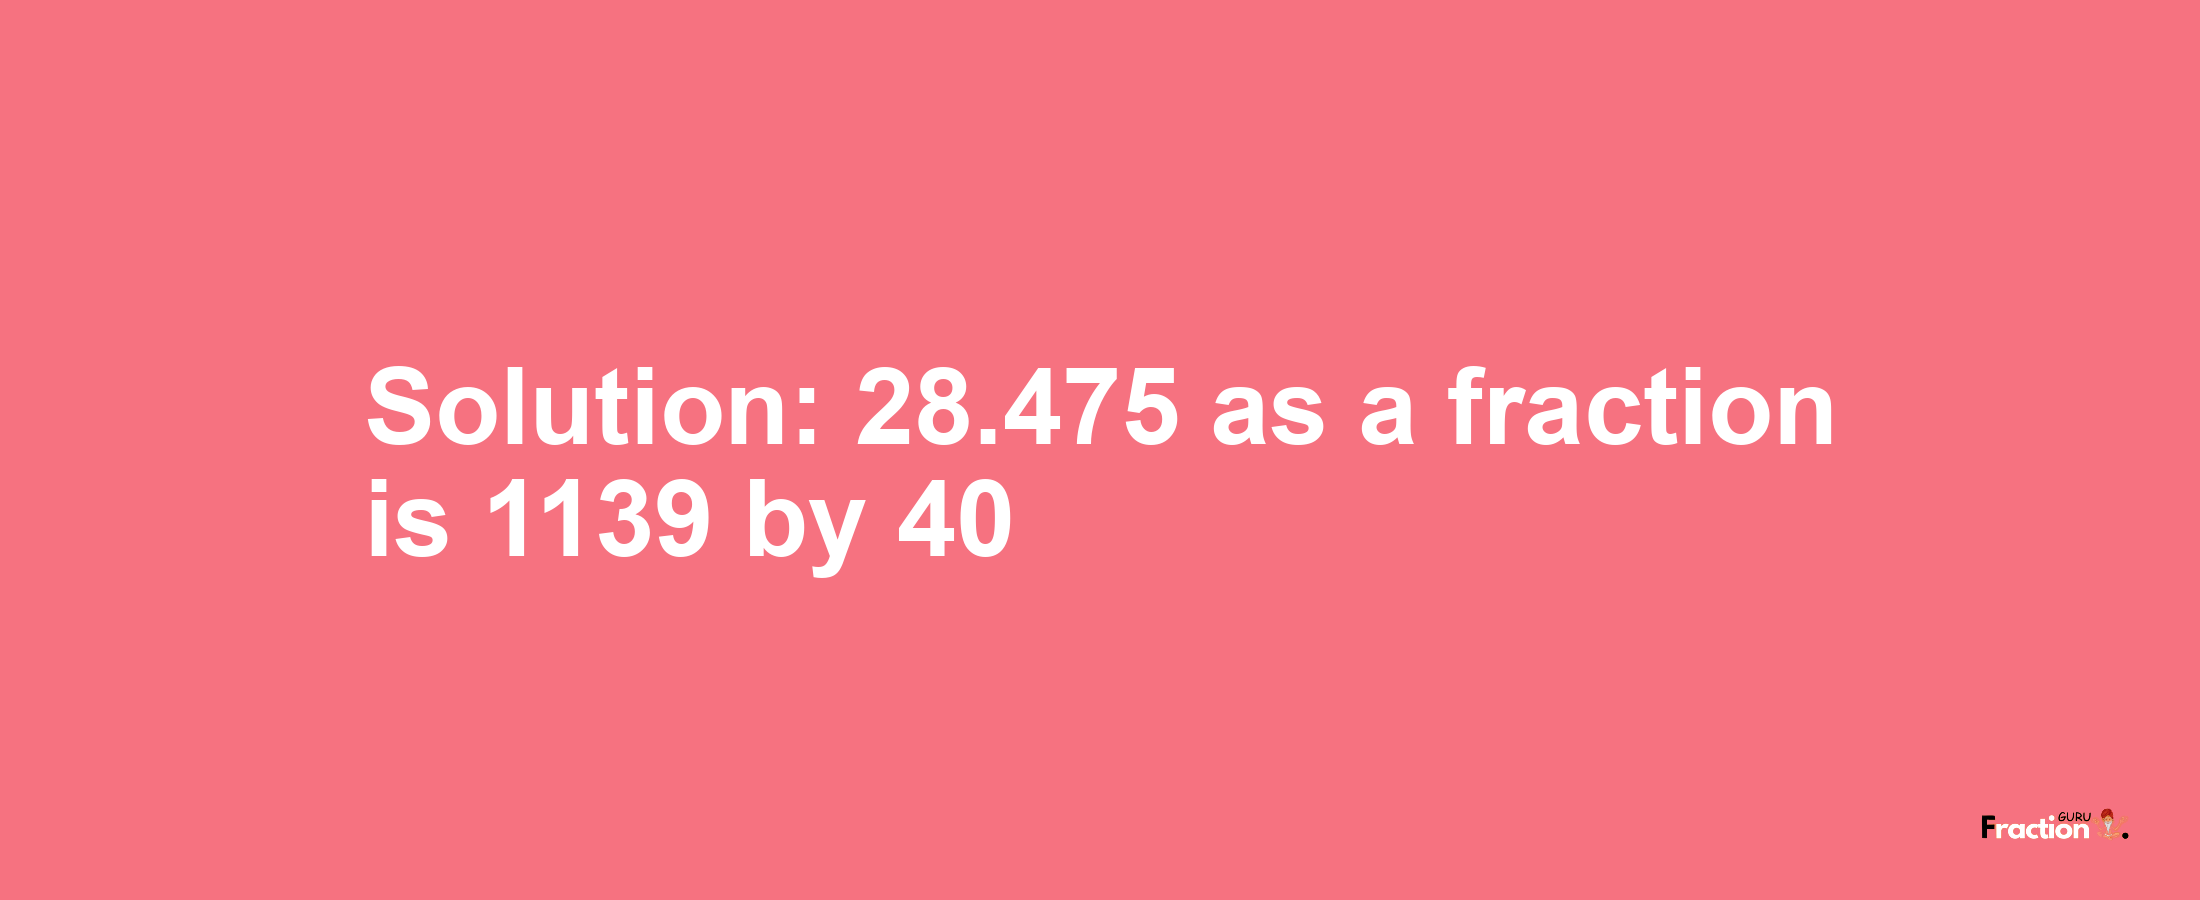 Solution:28.475 as a fraction is 1139/40